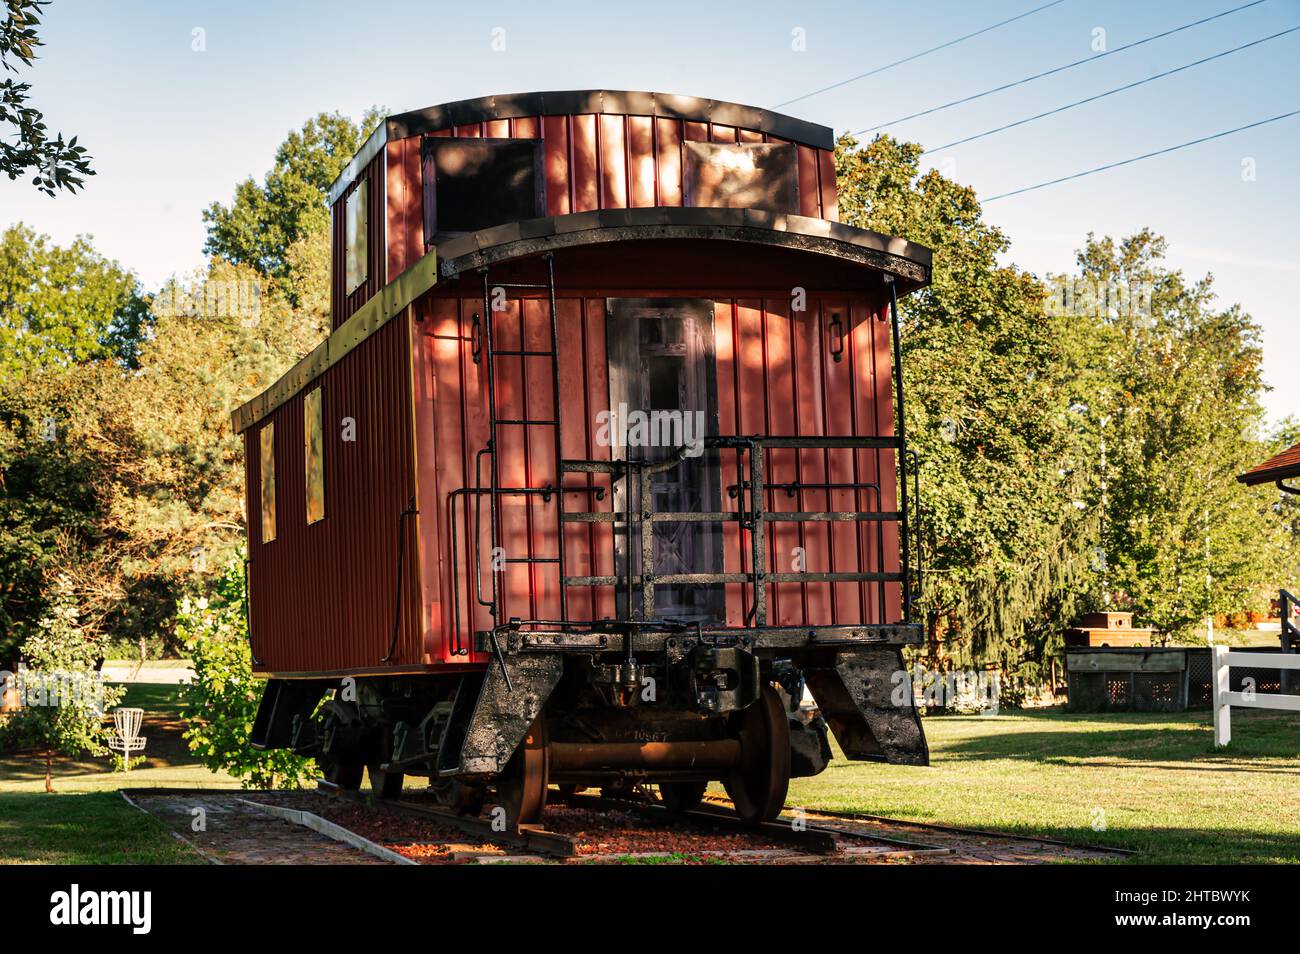 Old goods wagon in a park Stock Photo